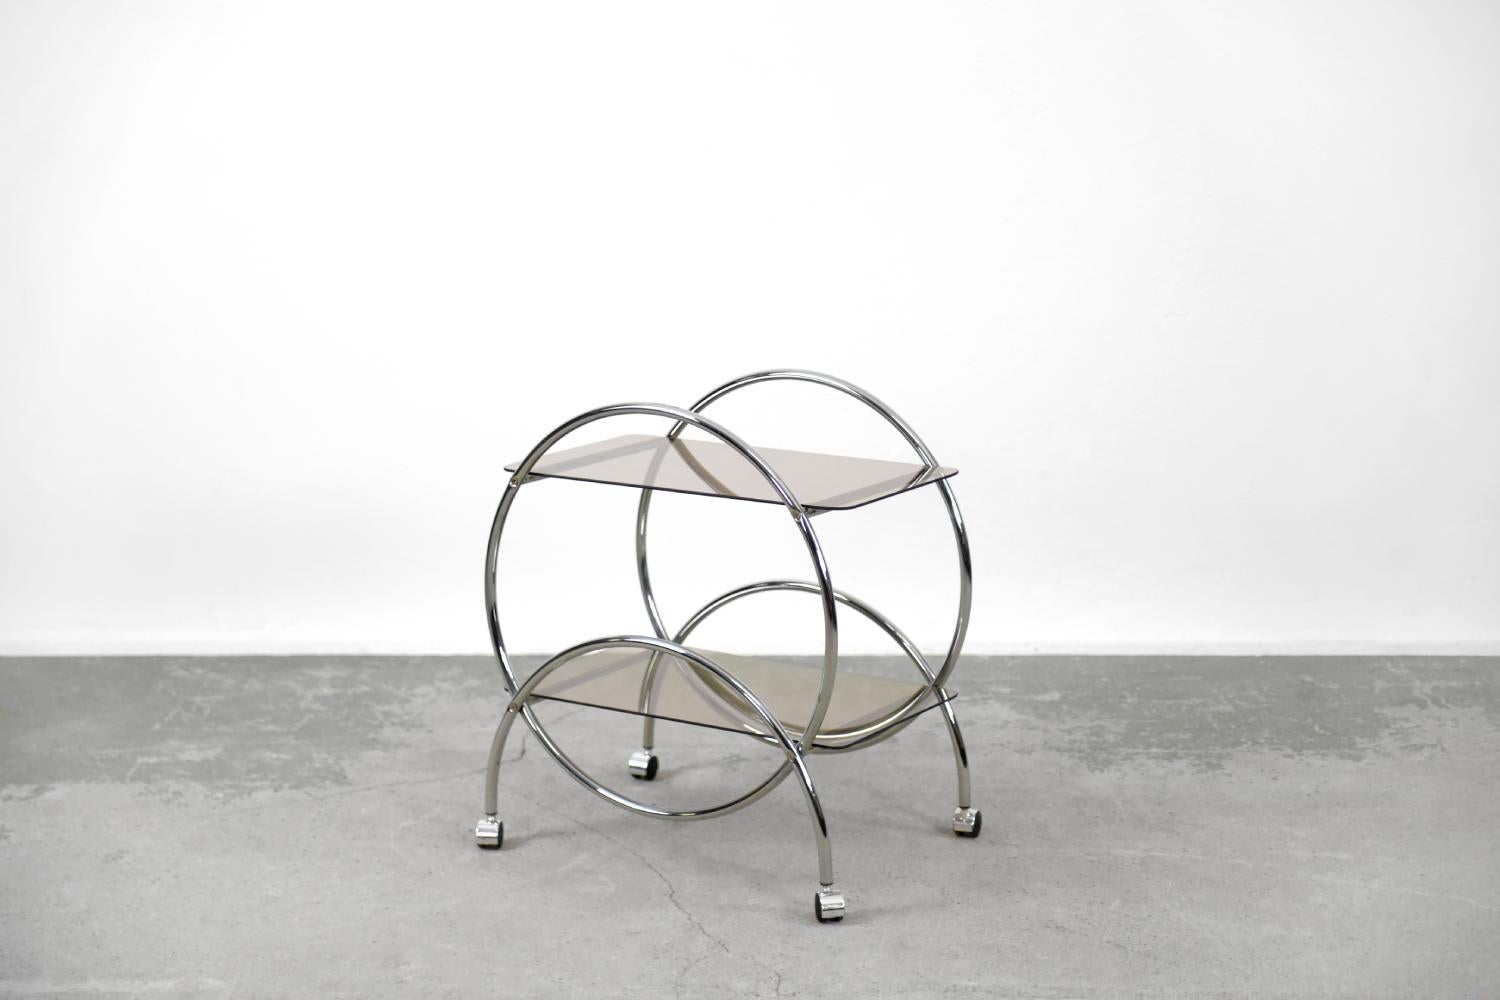 This two-level, round bar table was made by the Swedish company IKEA during the 1970s. Its form refers to the designs of the Bauhaus school and the pre-war Art dèco style. The geometric frame is made of chrome-plated tubular steel. On it there are